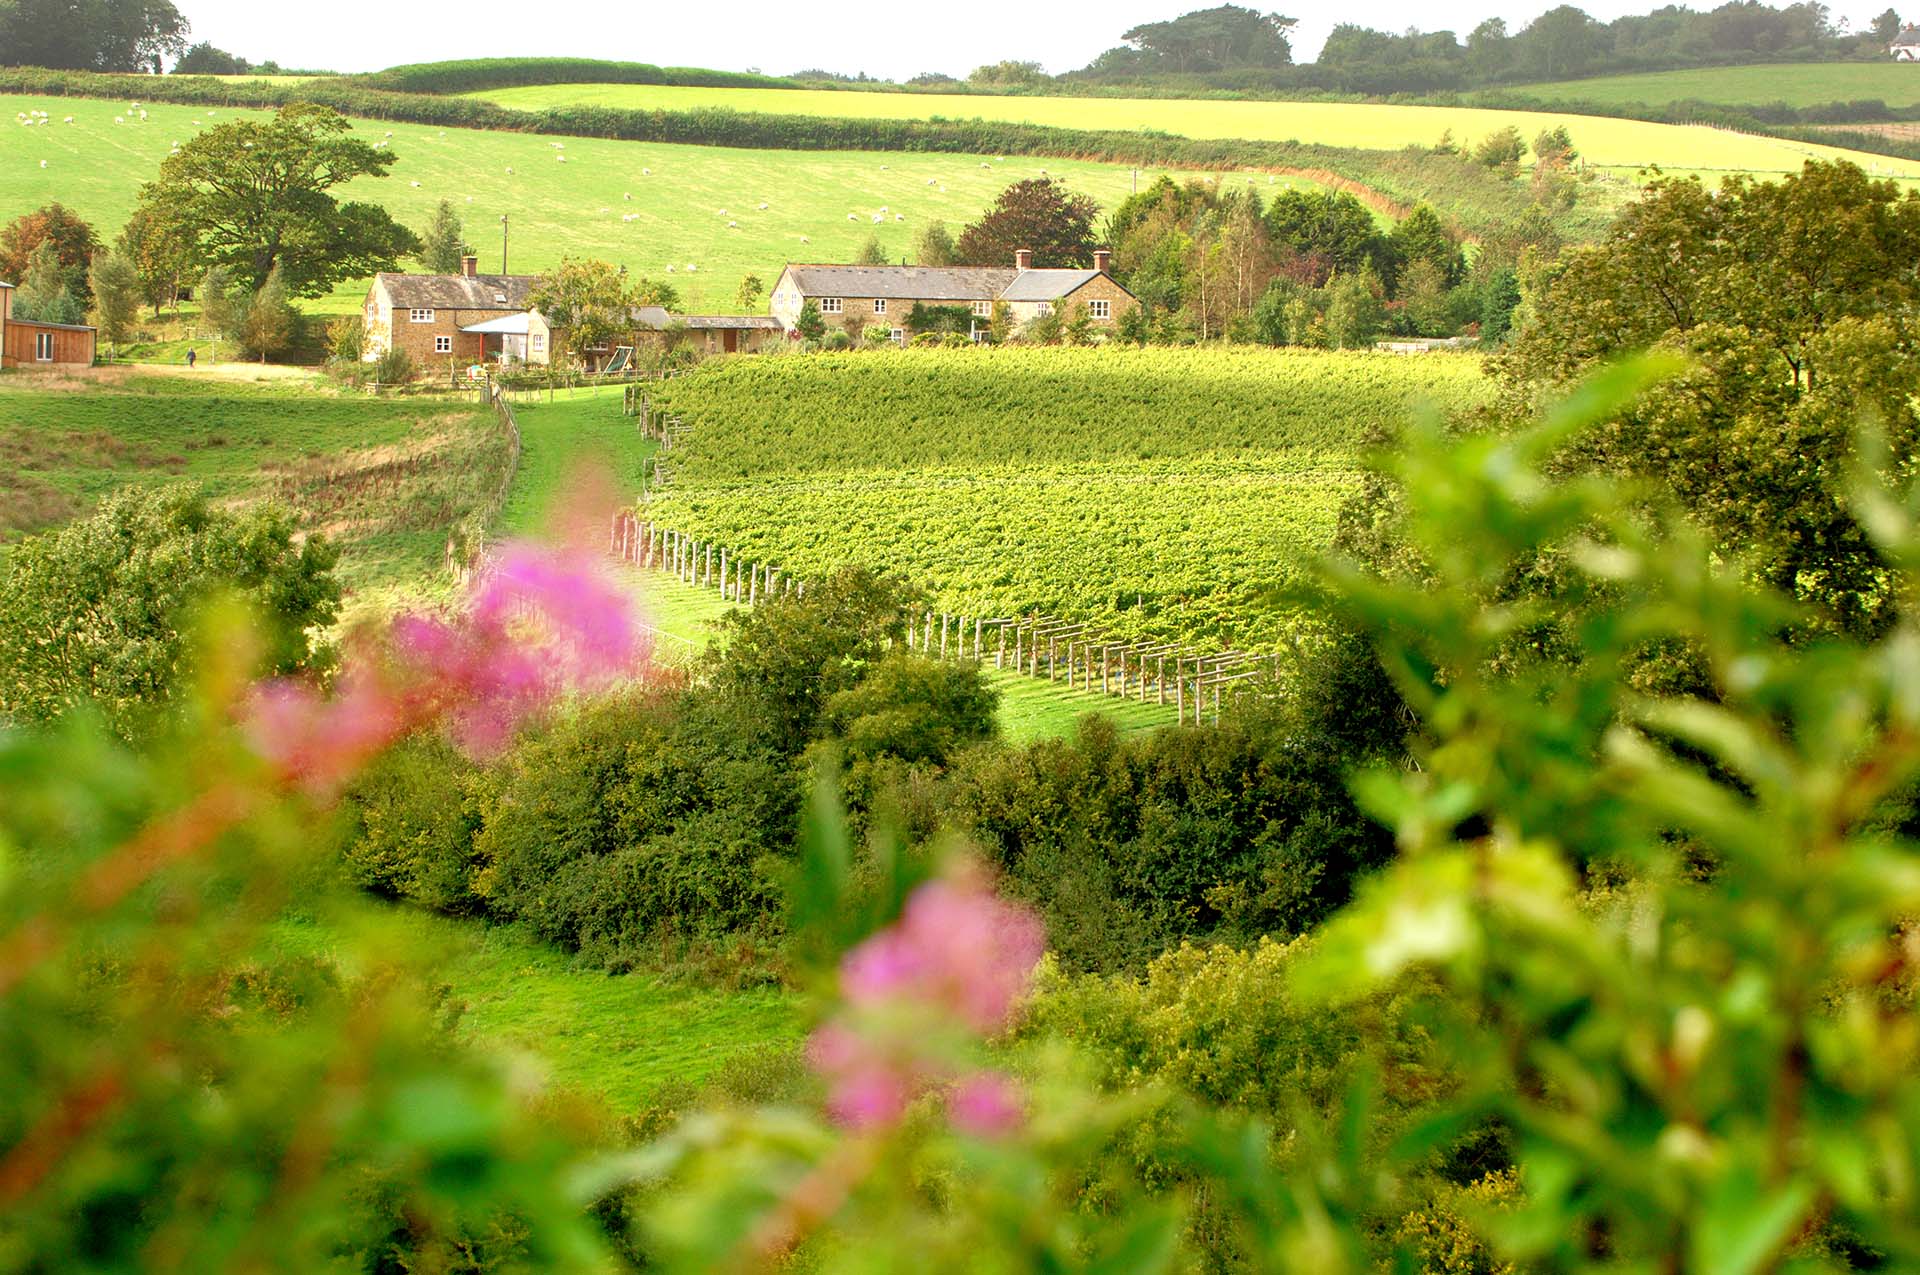 Vista shot of flowers in foreground, vineyards in midground and Furleigh Estate premises in background